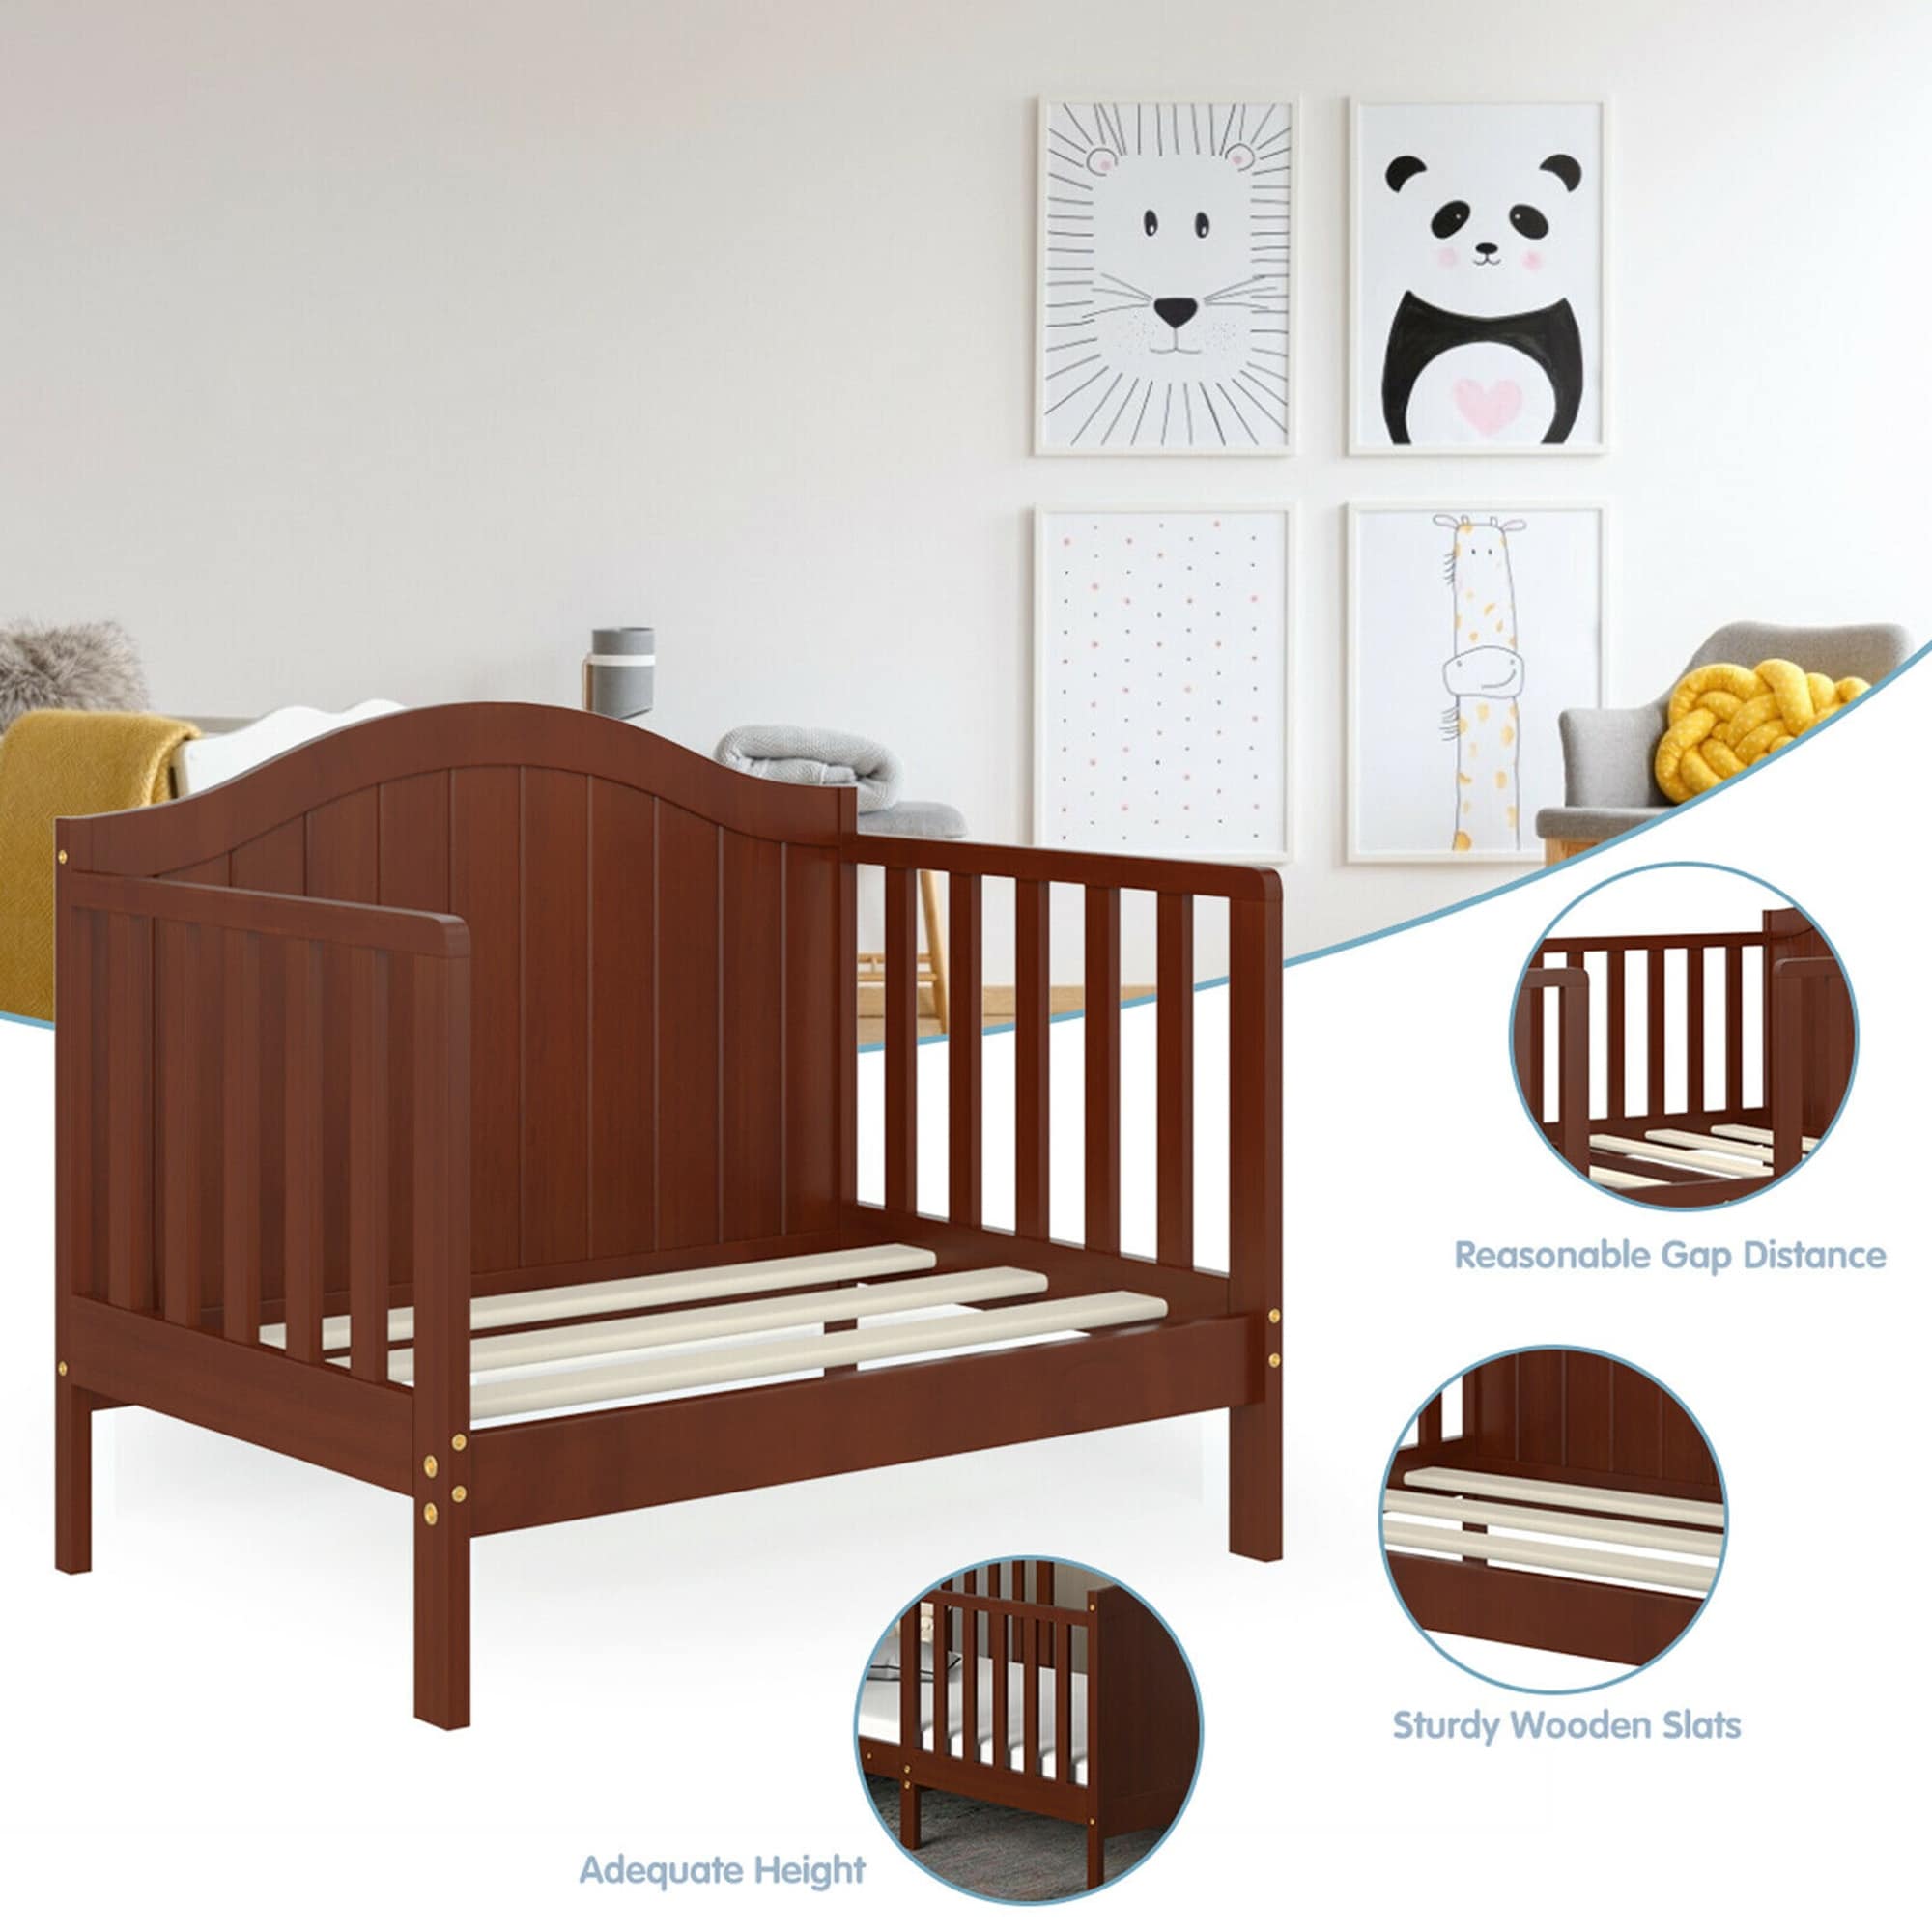 Gymax 2-in-1 Convertible Toddler Bed Kids Wooden Bedroom Furniture w/